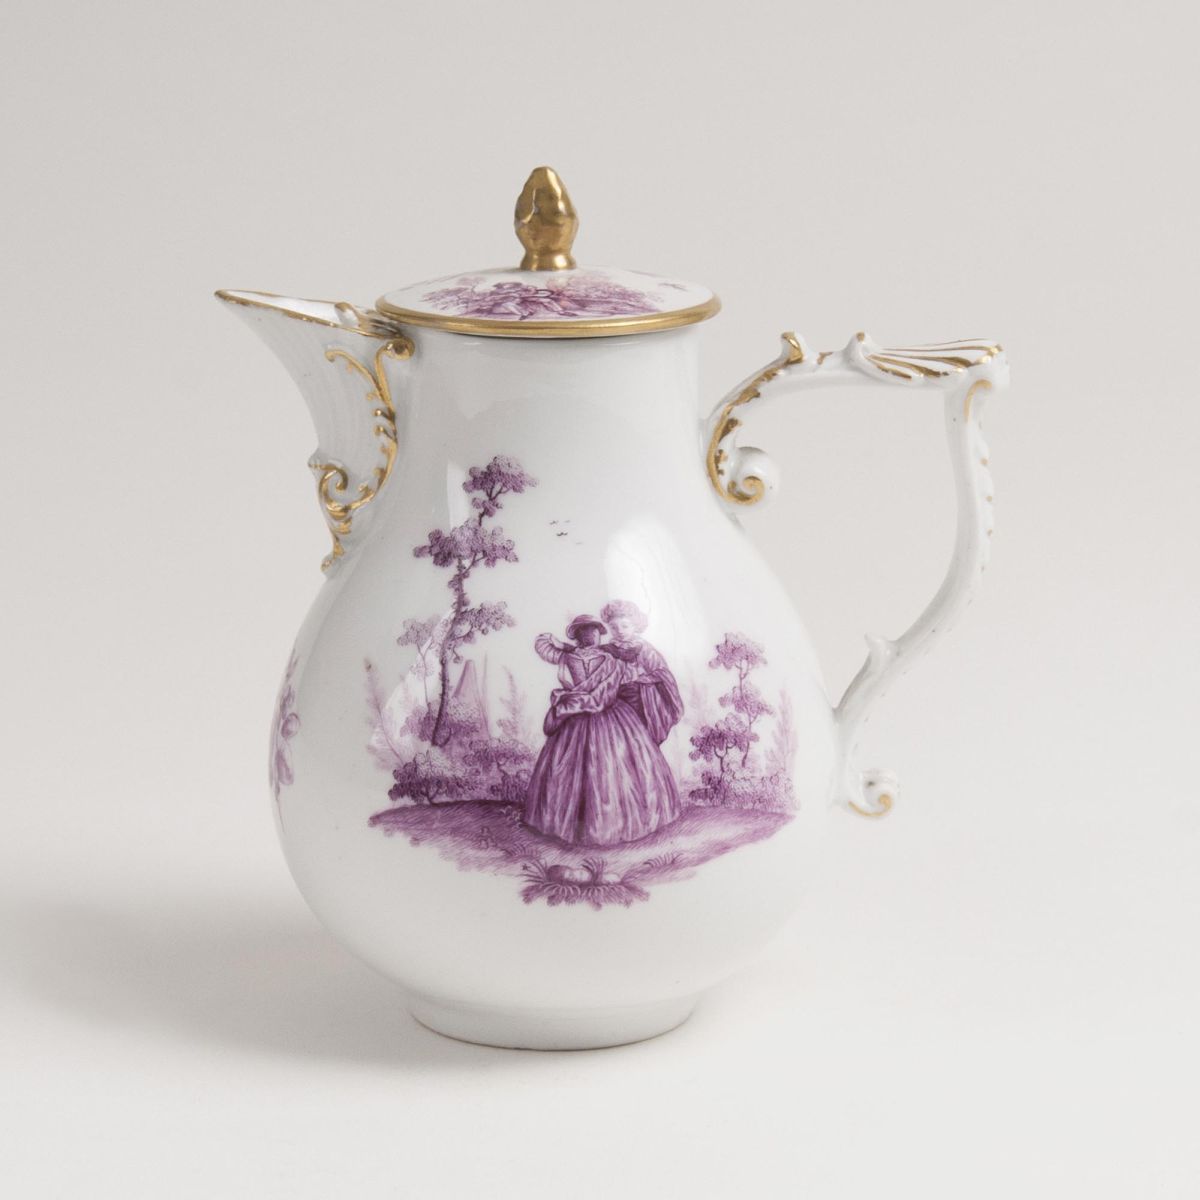 A Small Pot with Watteau Painting in Purple Monochrome - image 2